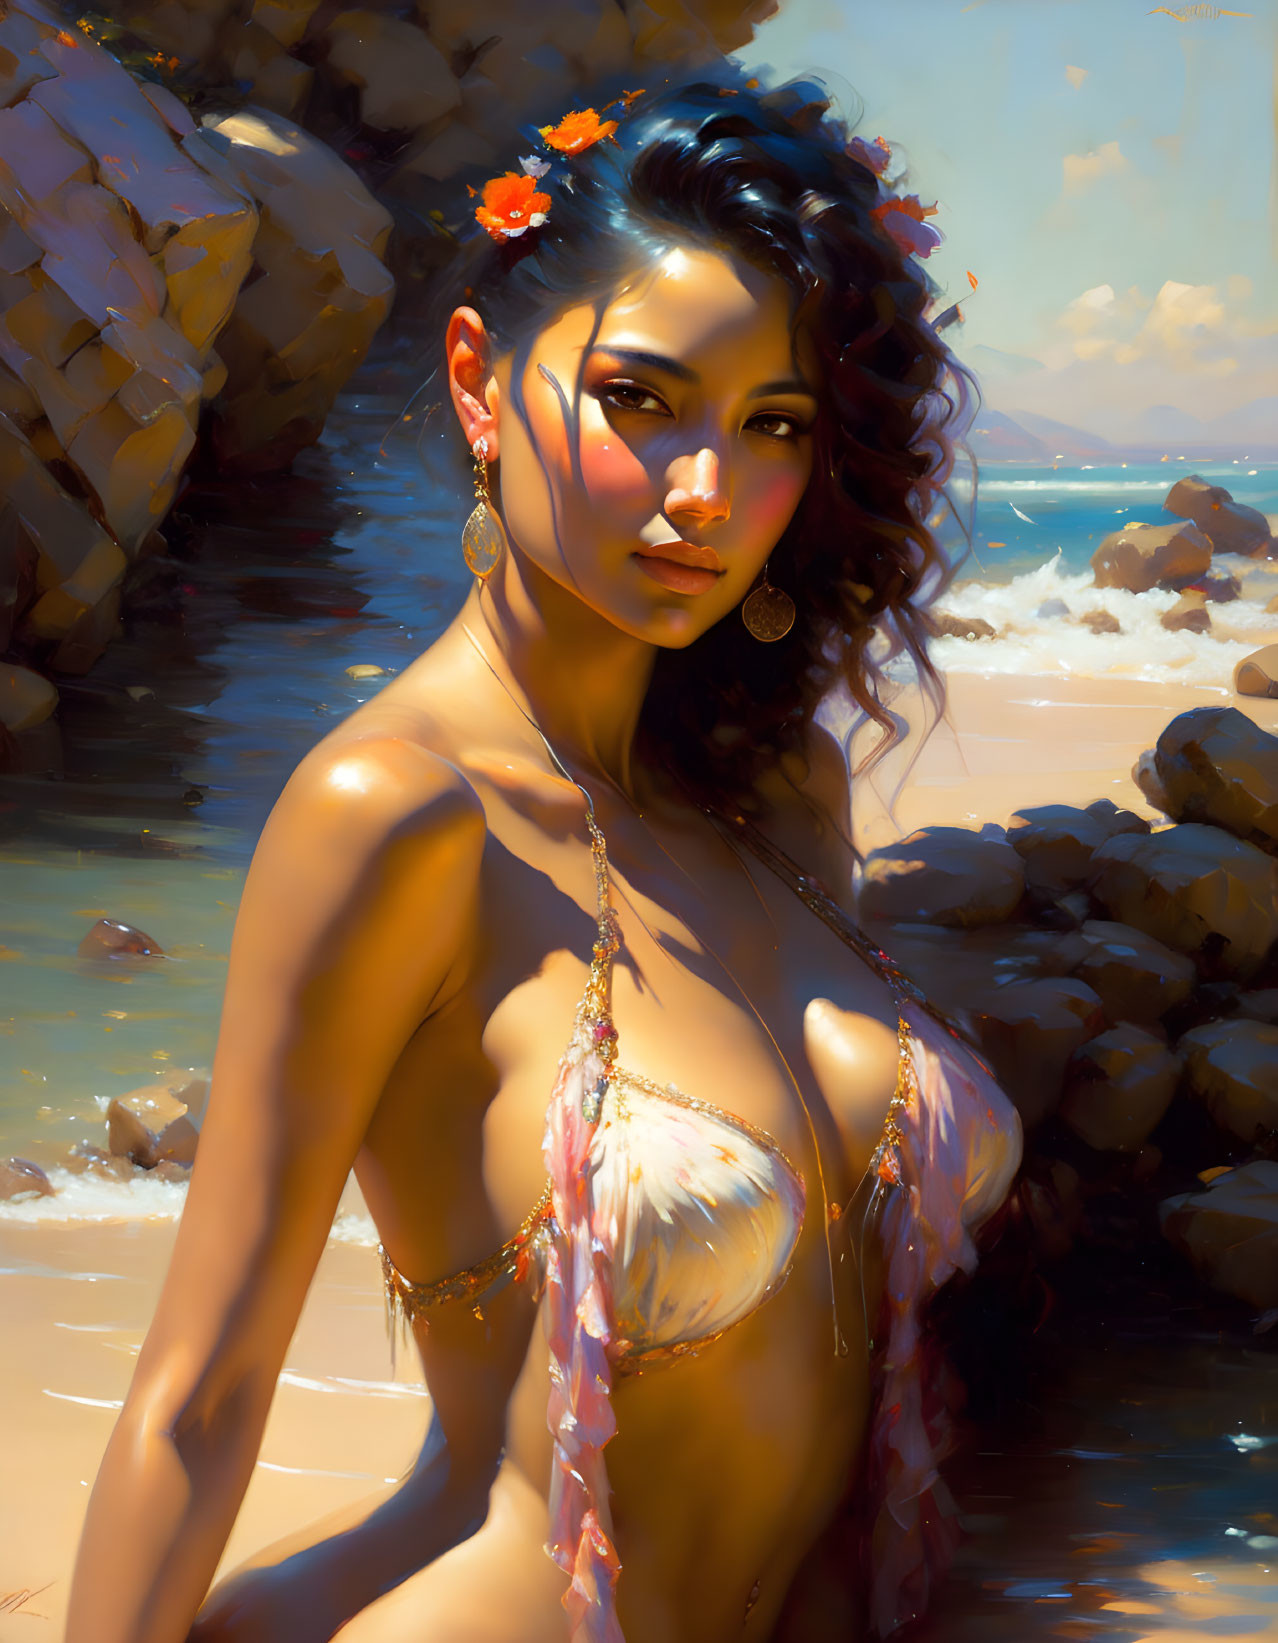 Woman with flowers in hair on sunny beach with rocks and waves, wearing shell necklace